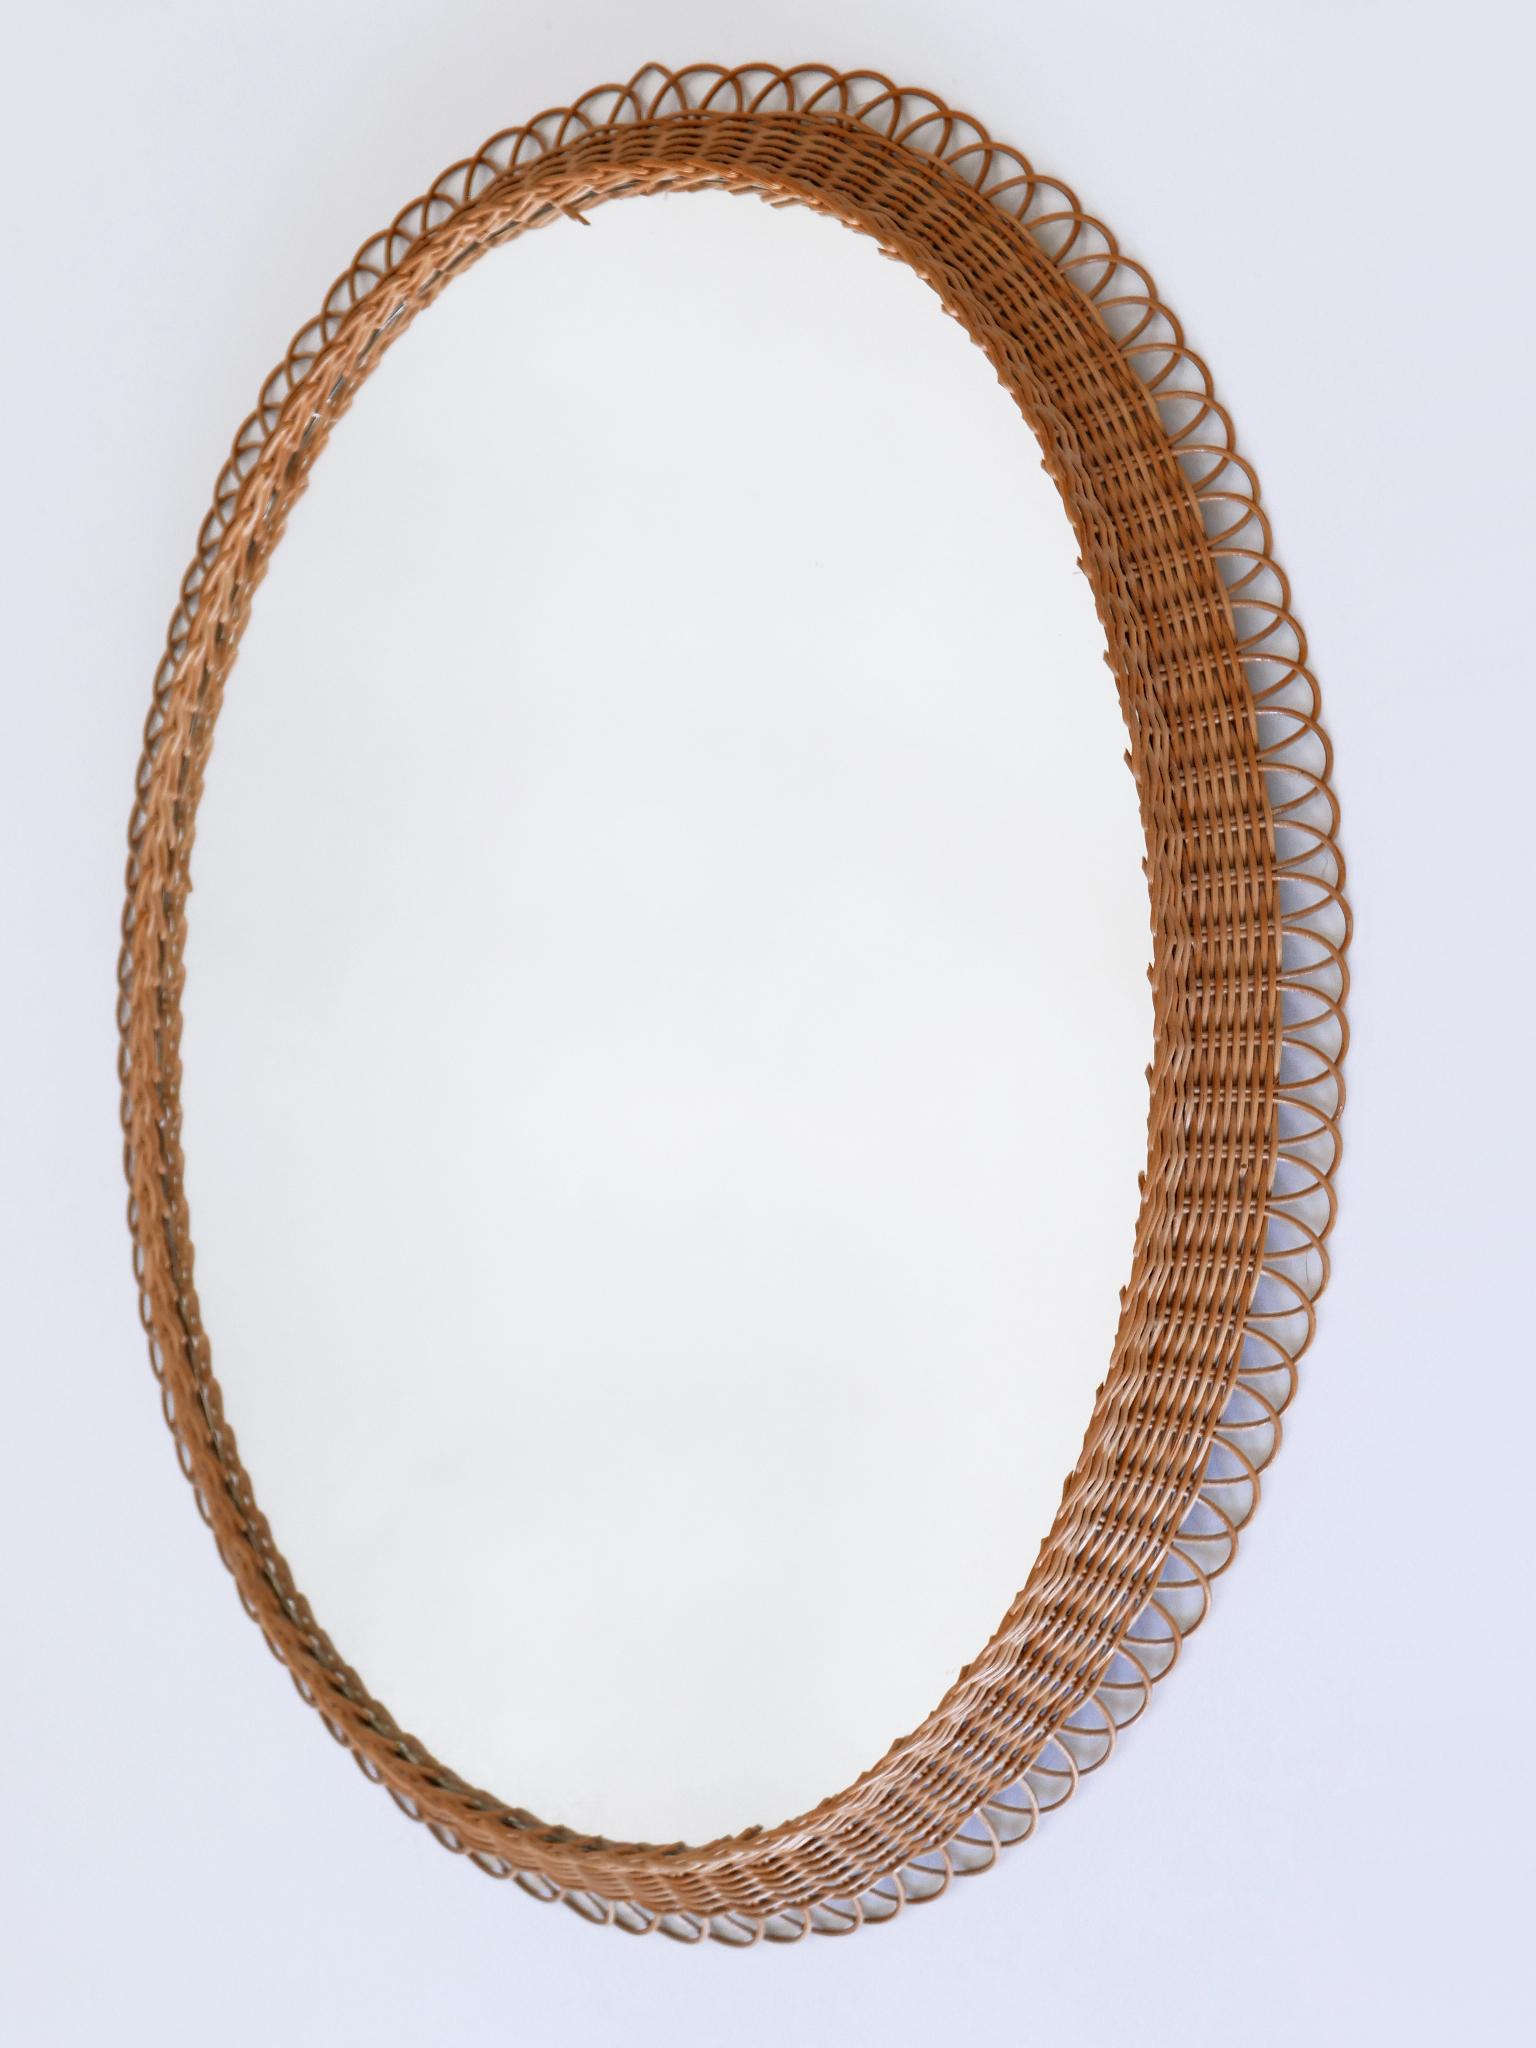 Decorative Mid-Century Modern Rattan Oval Wall Mirror Germany, 1960s For Sale 9